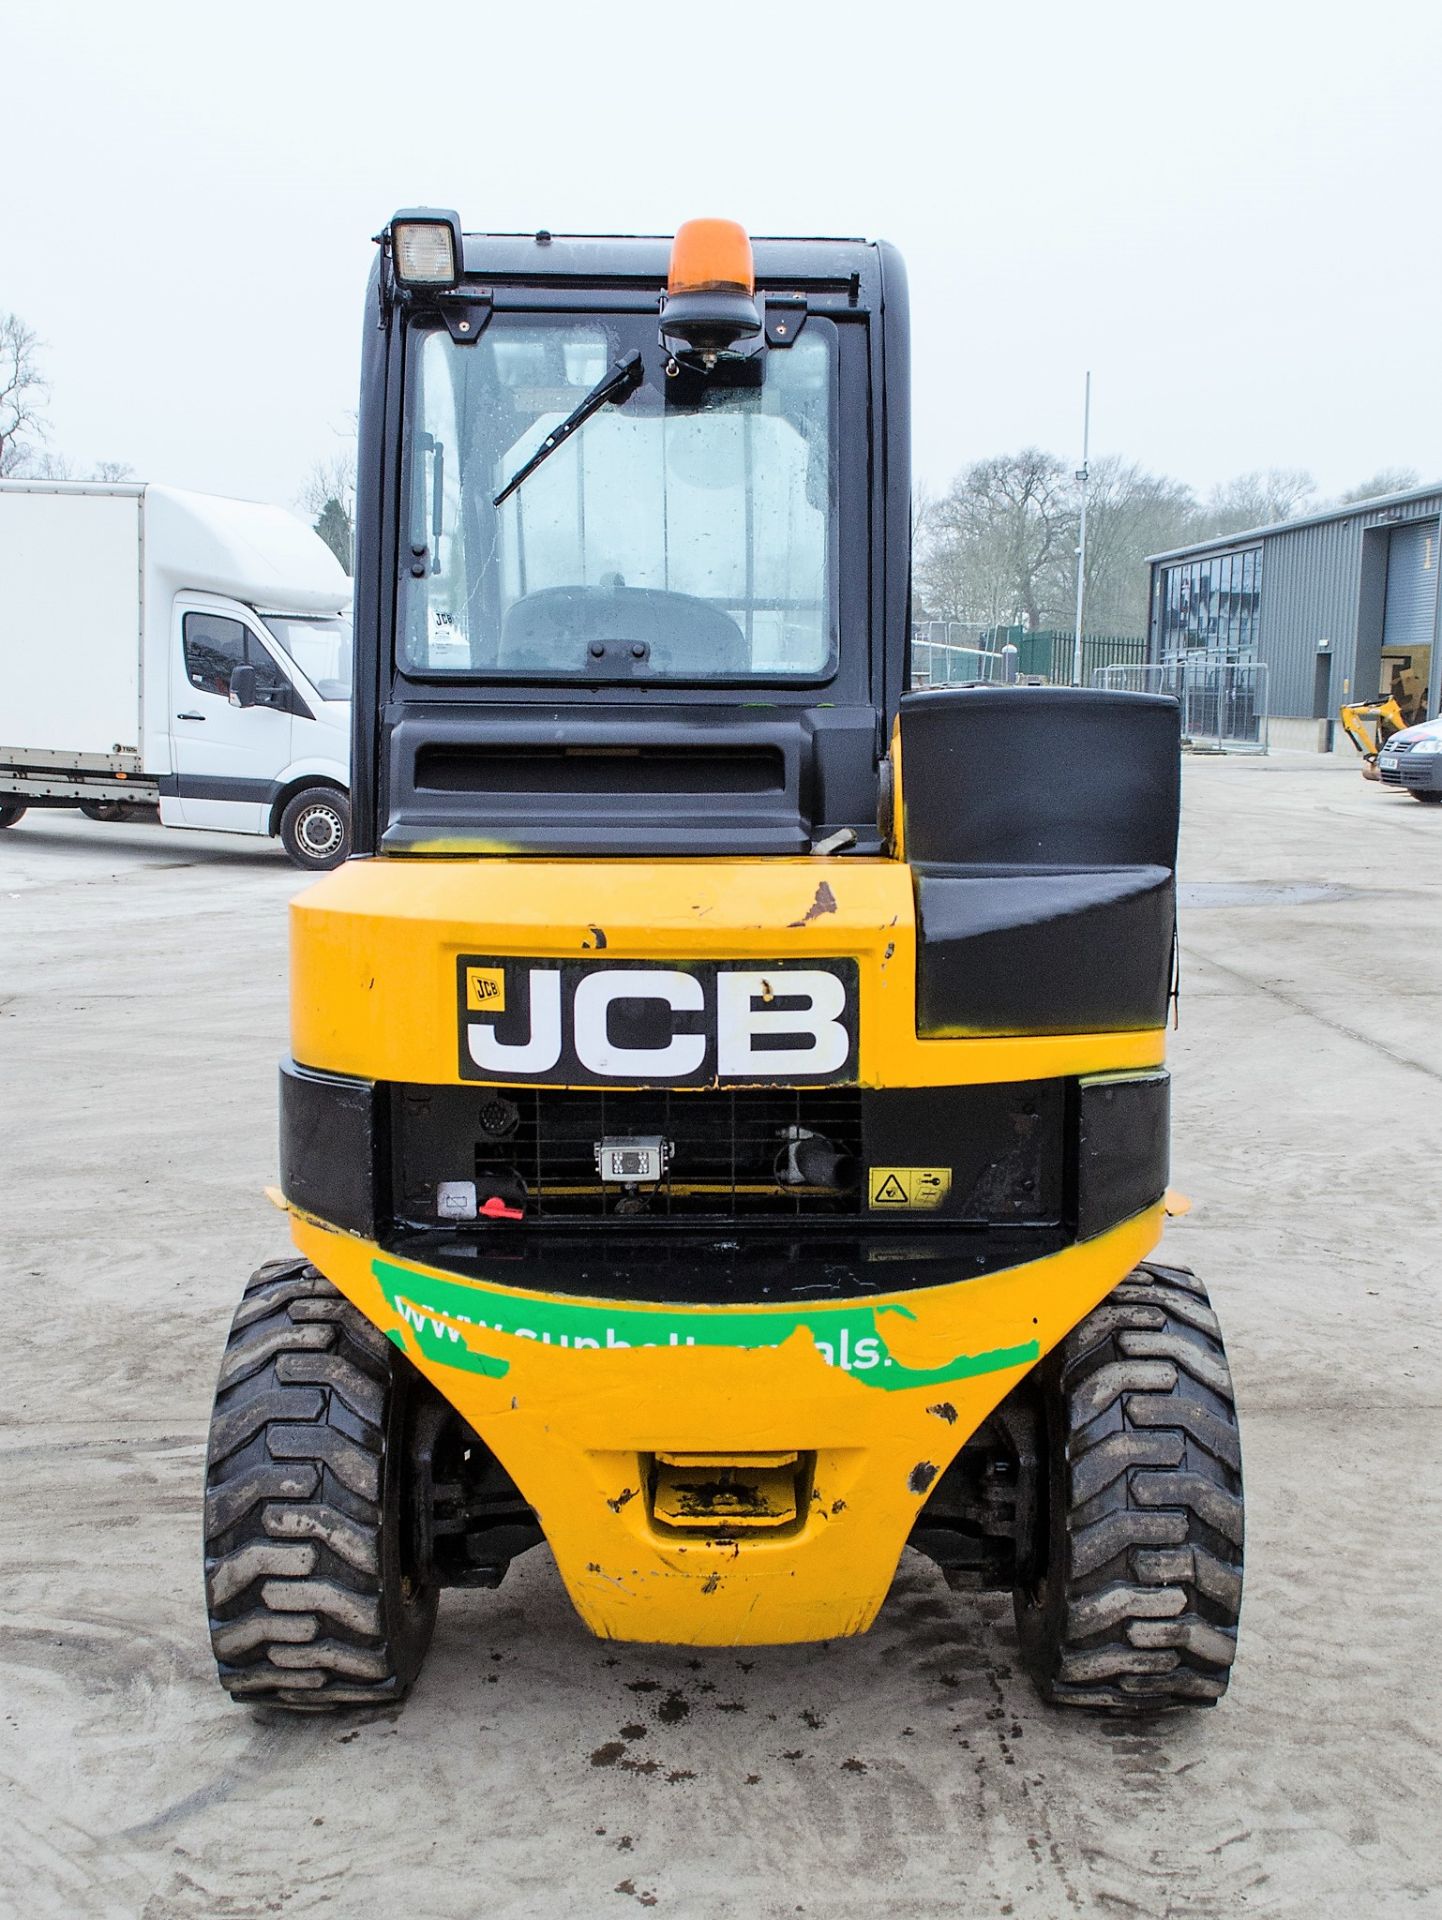 JCB Teletruk 30D 4x4 telescopic fork lift truck Year: 2013 S/N: 1541935 Recorded Hours: 1127 A623434 - Image 6 of 24